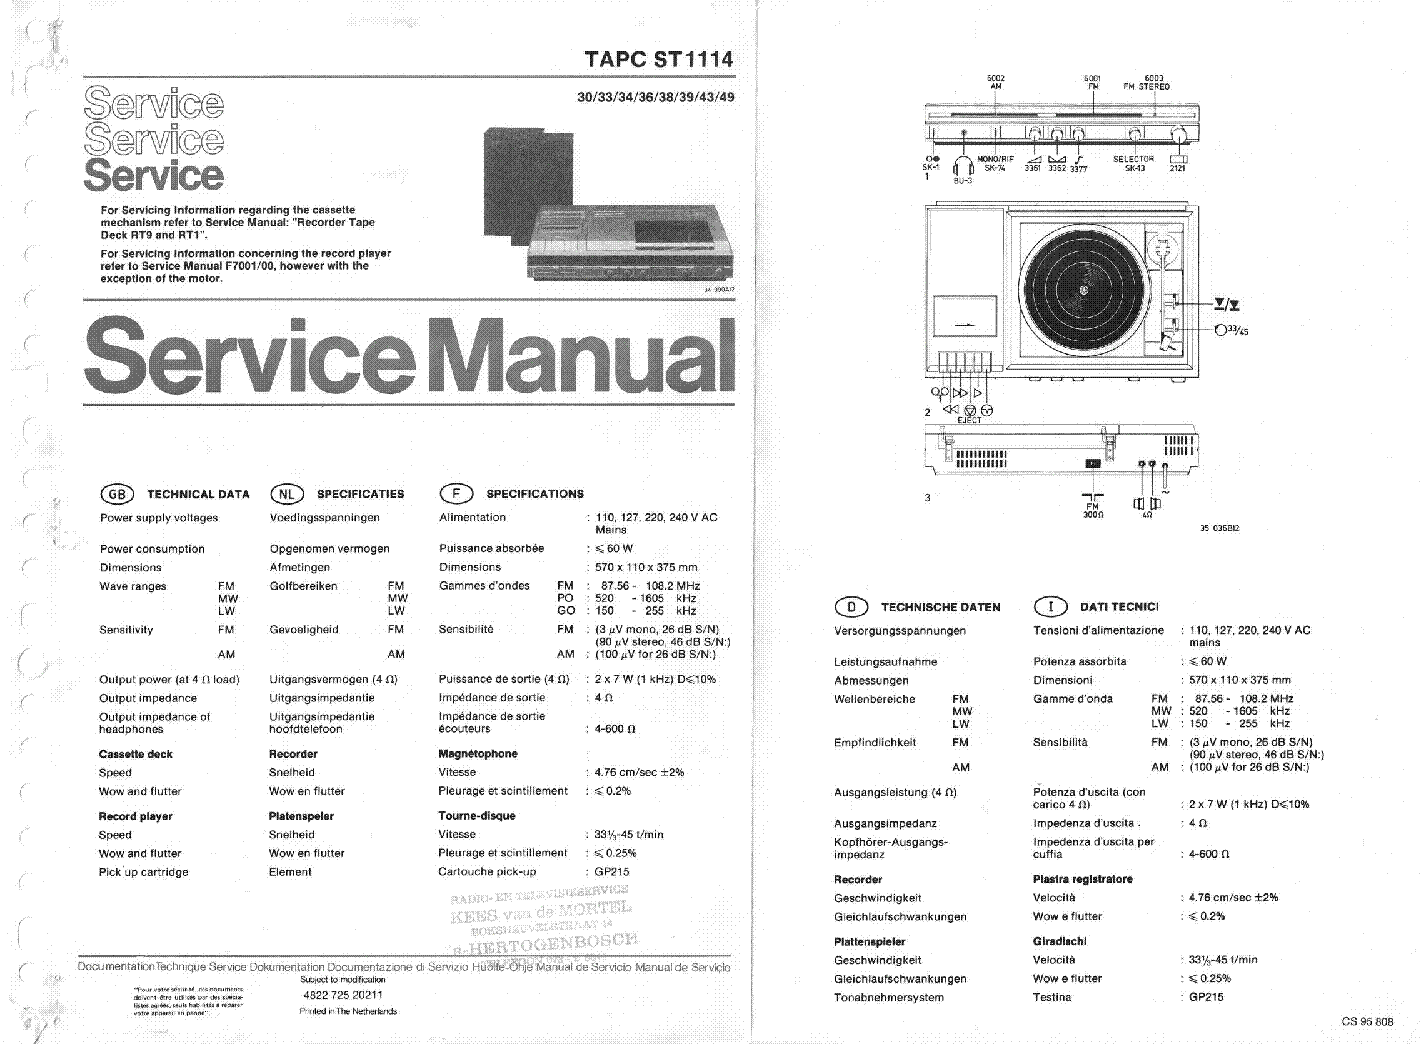 PHILIPS ST1114-30-33-34-36-38-39-43-49 SM service manual (1st page)